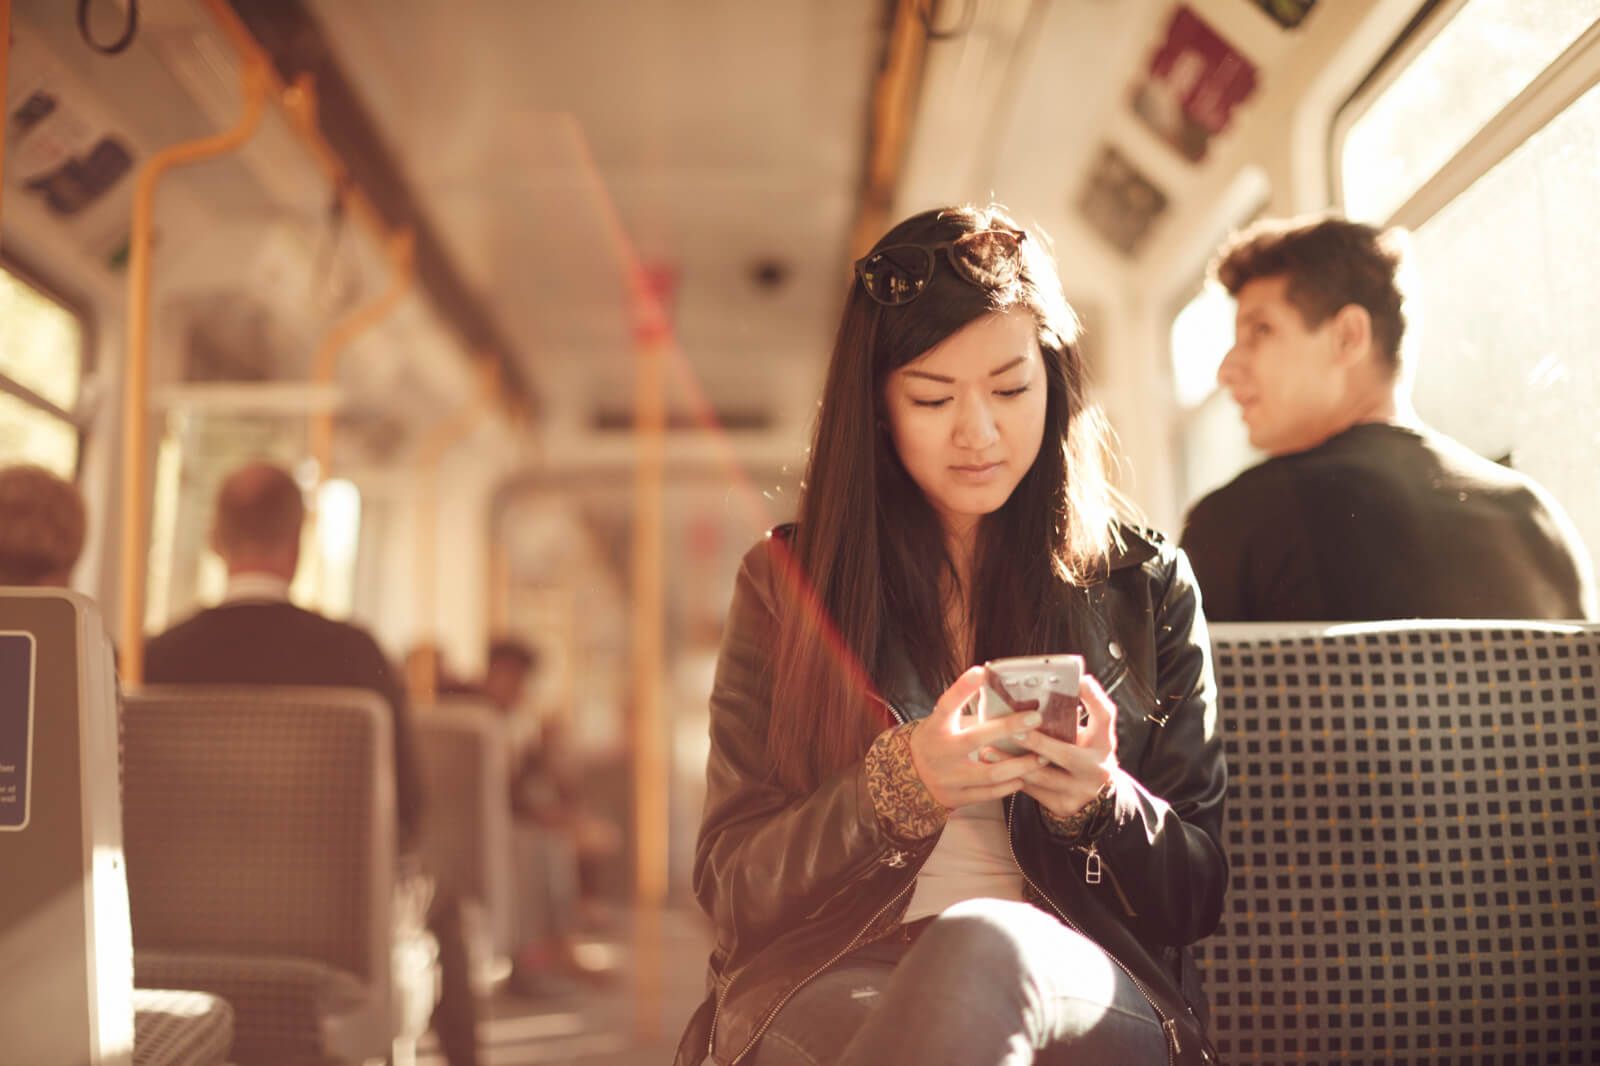 Student using her mobile on a train